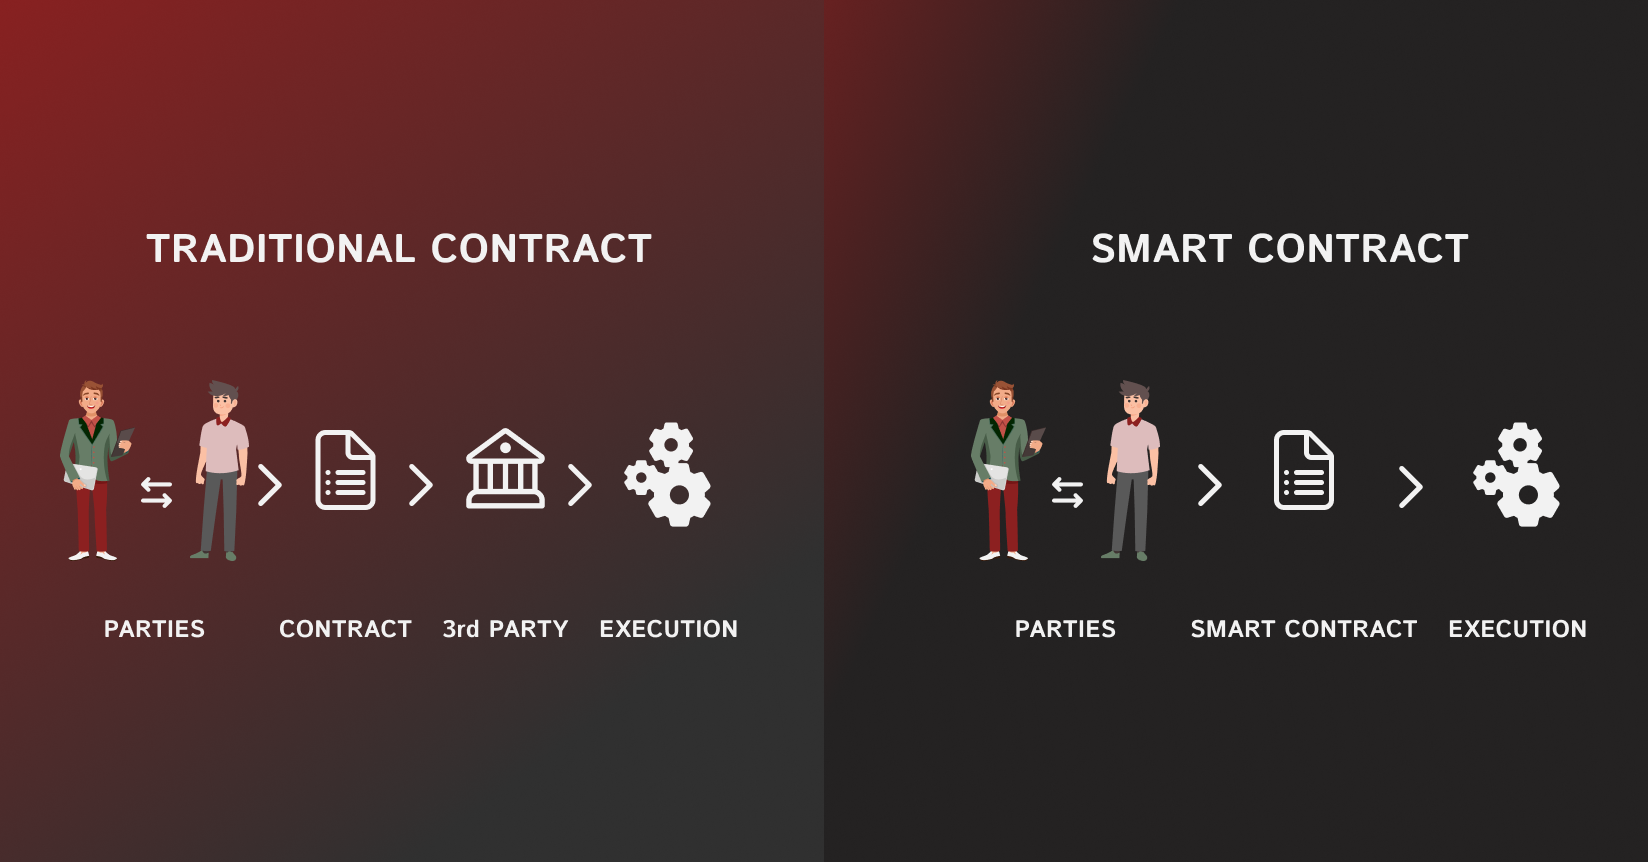 How traditional contract works on the left and how smart contract work on the right